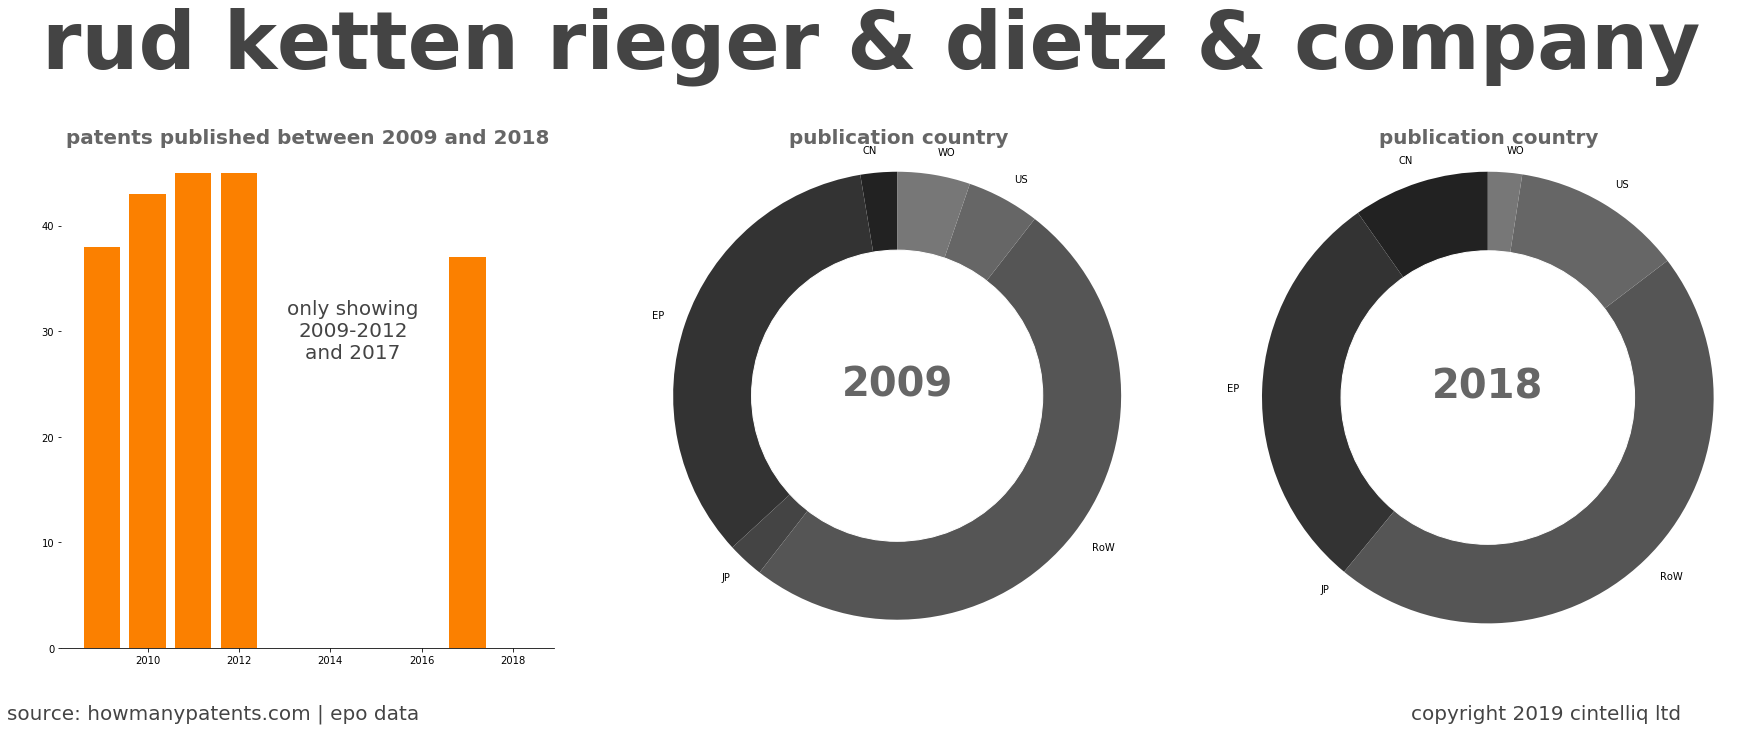 summary of patents for Rud Ketten Rieger & Dietz & Company